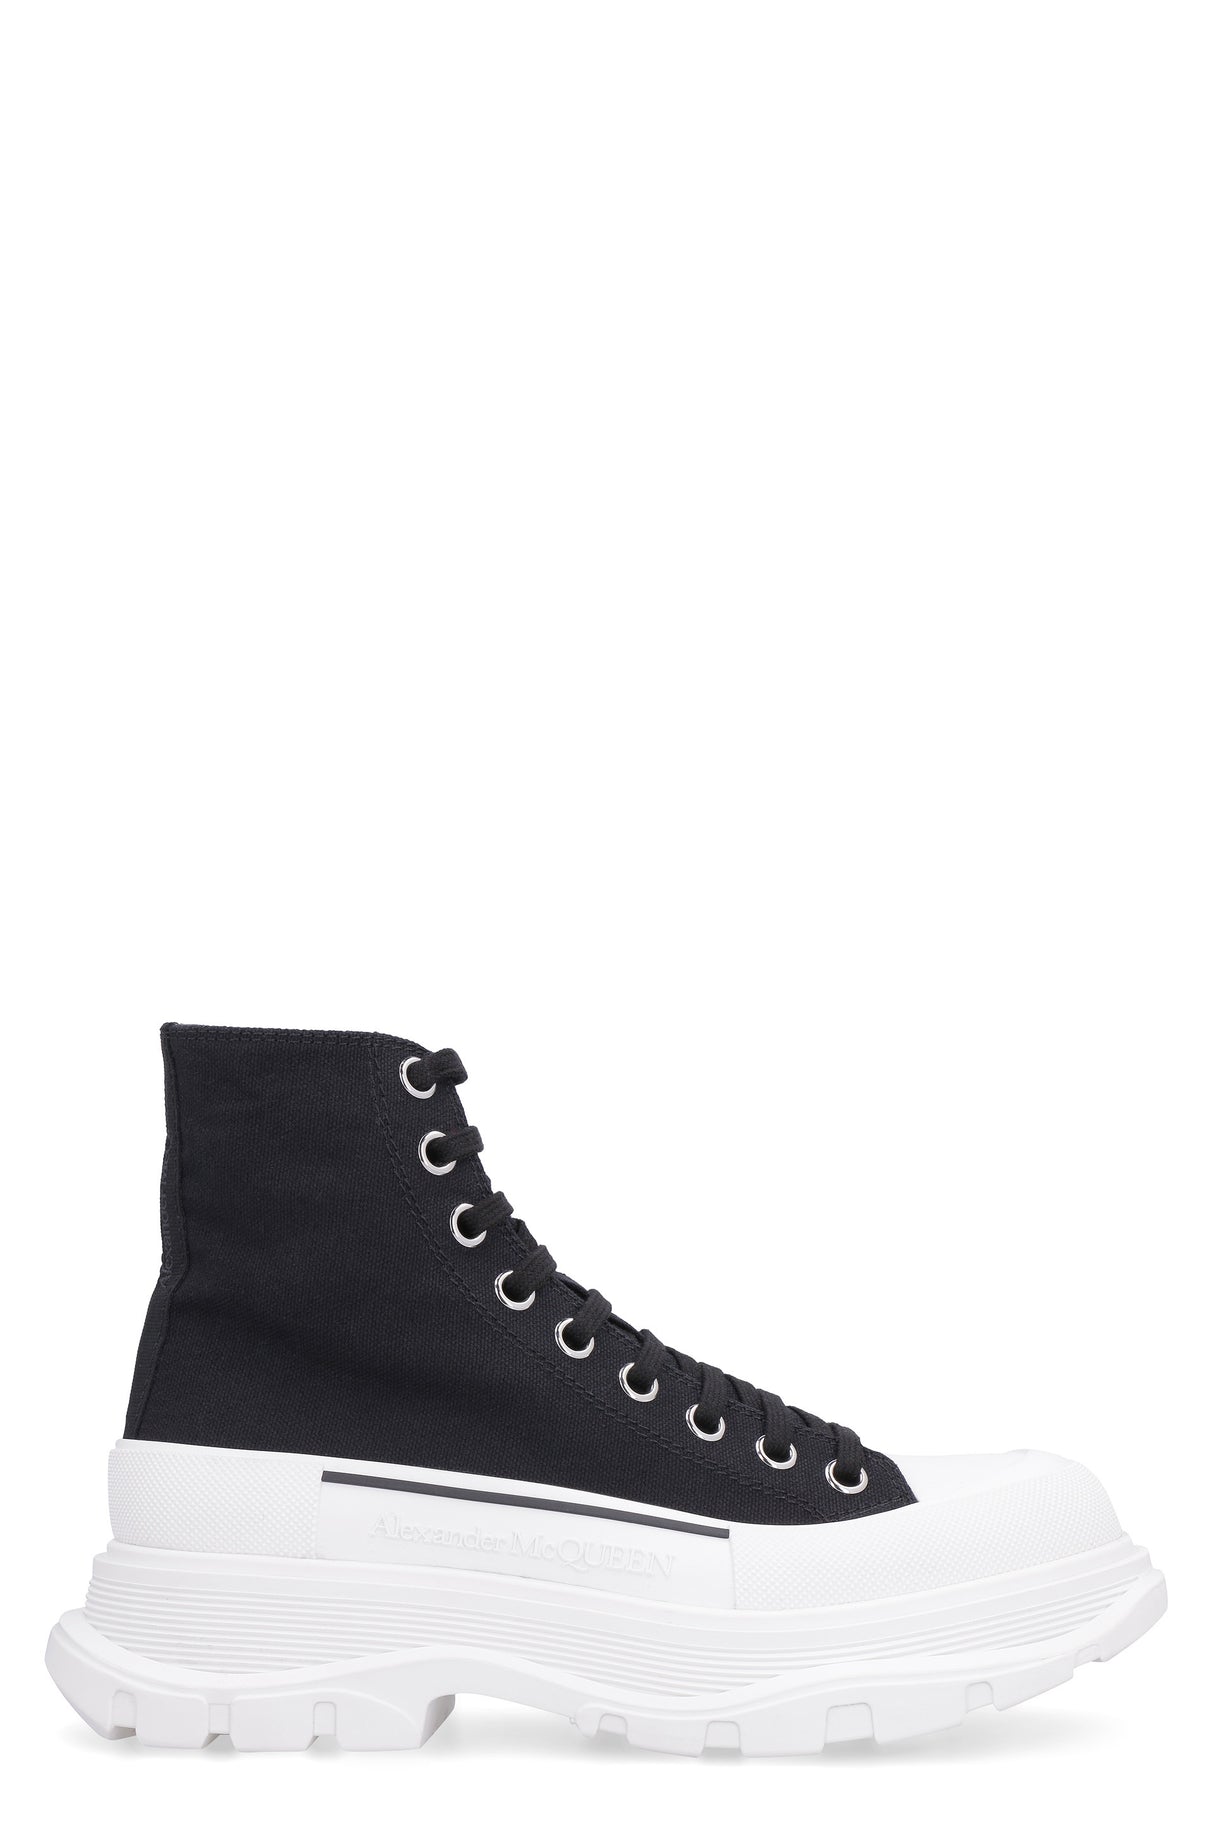 Bold Black Canvas Ankle Boots - FW23 Collection